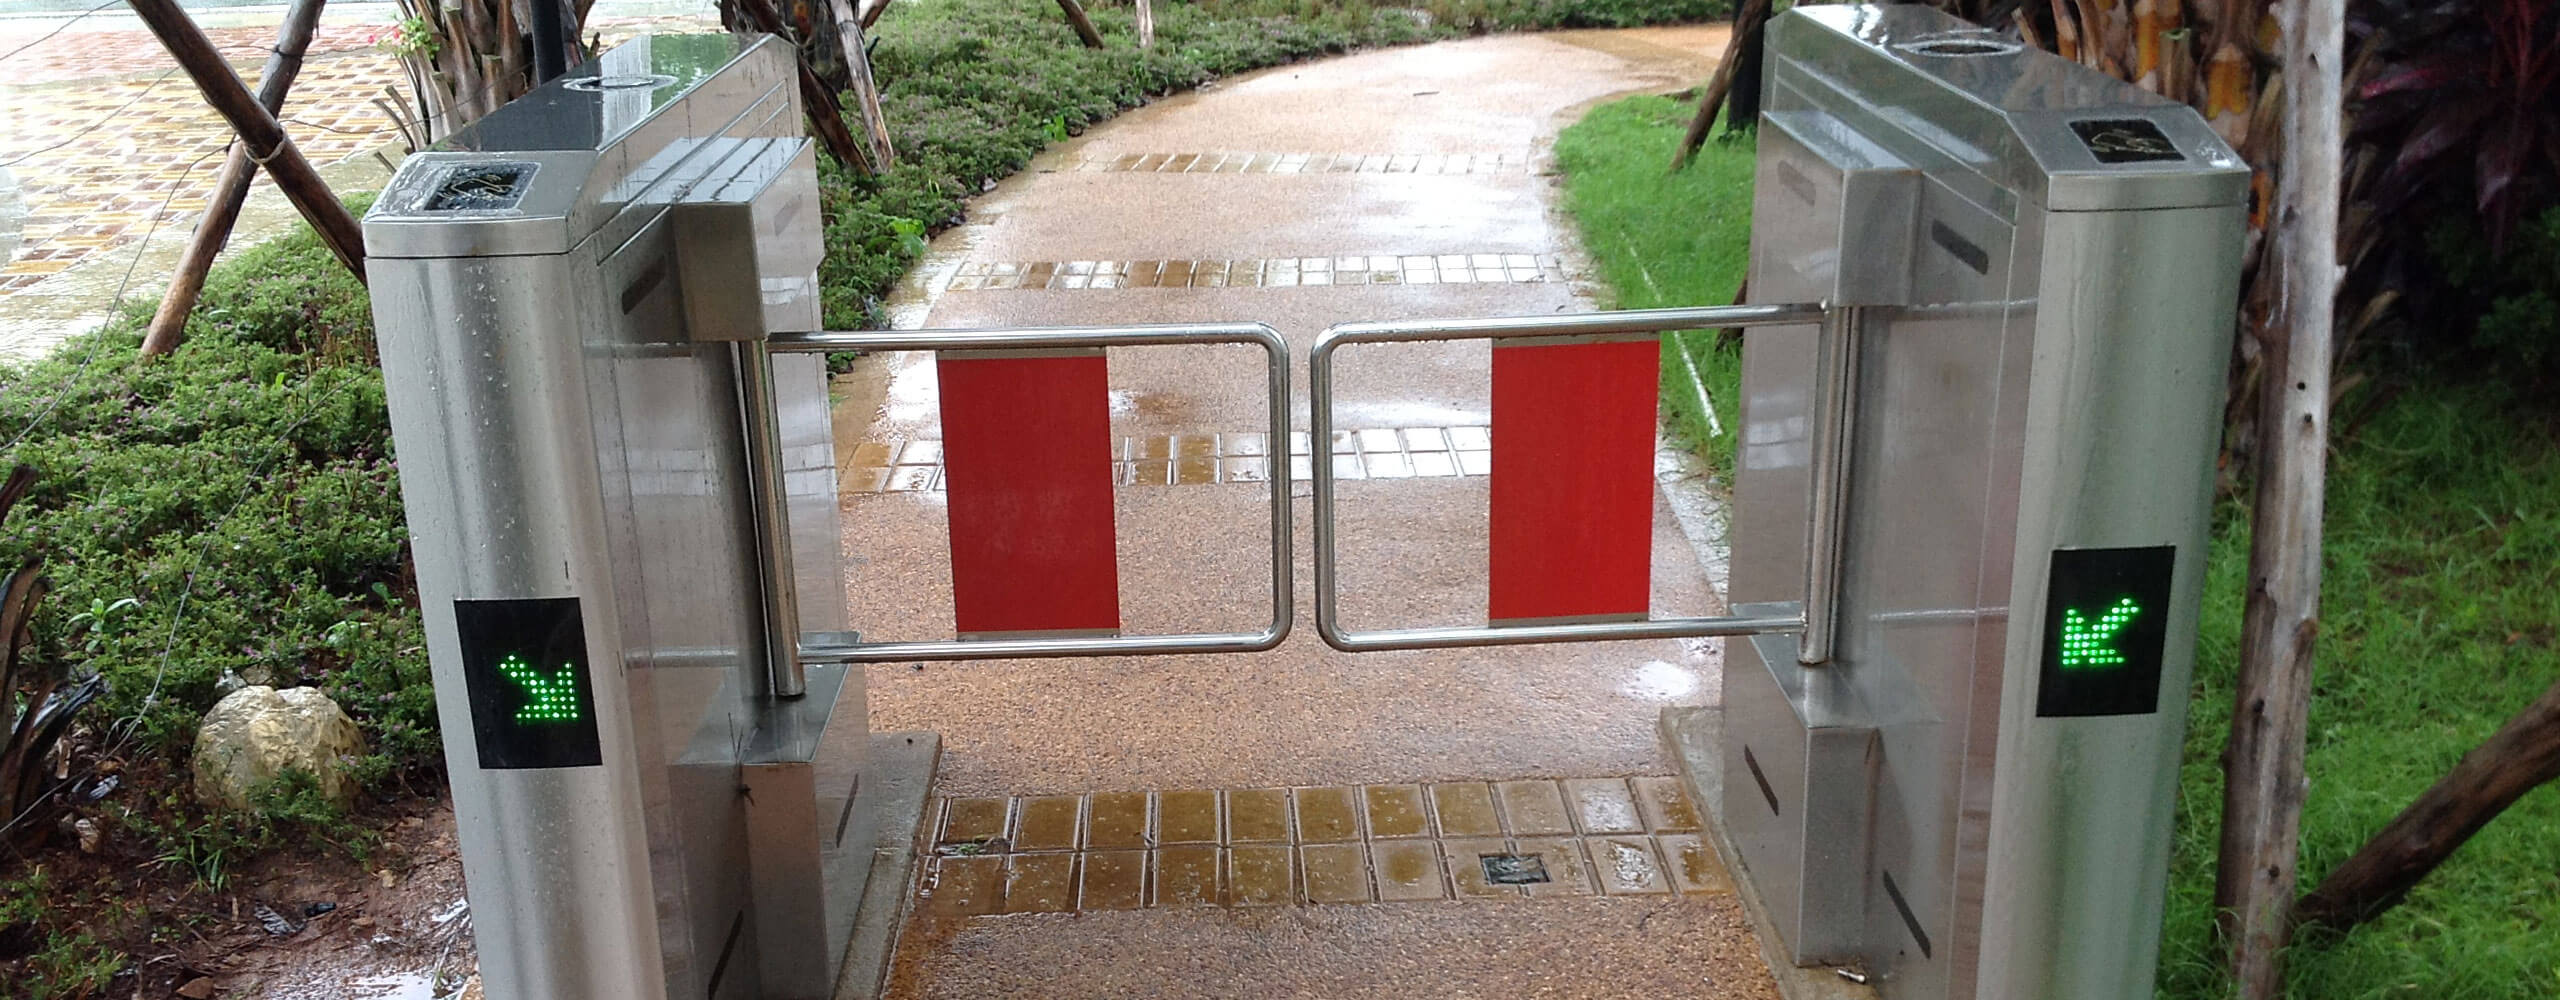 swing barriers and p gates